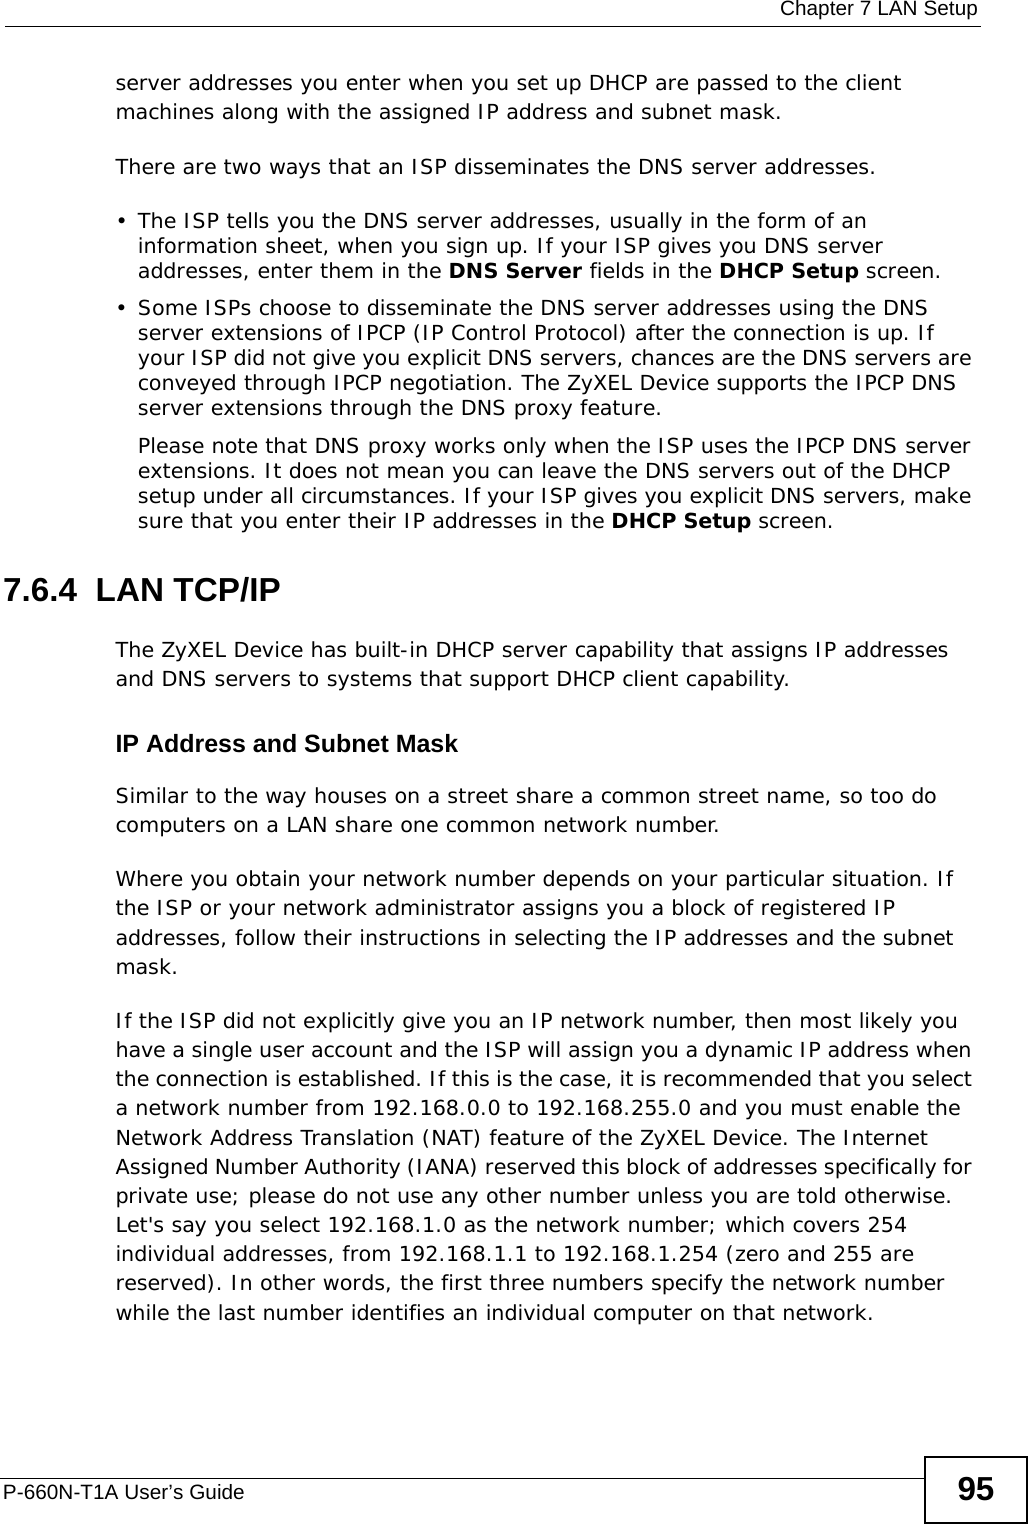  Chapter 7 LAN SetupP-660N-T1A User’s Guide 95server addresses you enter when you set up DHCP are passed to the client machines along with the assigned IP address and subnet mask.There are two ways that an ISP disseminates the DNS server addresses. • The ISP tells you the DNS server addresses, usually in the form of an information sheet, when you sign up. If your ISP gives you DNS server addresses, enter them in the DNS Server fields in the DHCP Setup screen.• Some ISPs choose to disseminate the DNS server addresses using the DNS server extensions of IPCP (IP Control Protocol) after the connection is up. If your ISP did not give you explicit DNS servers, chances are the DNS servers are conveyed through IPCP negotiation. The ZyXEL Device supports the IPCP DNS server extensions through the DNS proxy feature.Please note that DNS proxy works only when the ISP uses the IPCP DNS server extensions. It does not mean you can leave the DNS servers out of the DHCP setup under all circumstances. If your ISP gives you explicit DNS servers, make sure that you enter their IP addresses in the DHCP Setup screen.7.6.4  LAN TCP/IP The ZyXEL Device has built-in DHCP server capability that assigns IP addresses and DNS servers to systems that support DHCP client capability.IP Address and Subnet MaskSimilar to the way houses on a street share a common street name, so too do computers on a LAN share one common network number.Where you obtain your network number depends on your particular situation. If the ISP or your network administrator assigns you a block of registered IP addresses, follow their instructions in selecting the IP addresses and the subnet mask.If the ISP did not explicitly give you an IP network number, then most likely you have a single user account and the ISP will assign you a dynamic IP address when the connection is established. If this is the case, it is recommended that you select a network number from 192.168.0.0 to 192.168.255.0 and you must enable the Network Address Translation (NAT) feature of the ZyXEL Device. The Internet Assigned Number Authority (IANA) reserved this block of addresses specifically for private use; please do not use any other number unless you are told otherwise. Let&apos;s say you select 192.168.1.0 as the network number; which covers 254 individual addresses, from 192.168.1.1 to 192.168.1.254 (zero and 255 are reserved). In other words, the first three numbers specify the network number while the last number identifies an individual computer on that network.